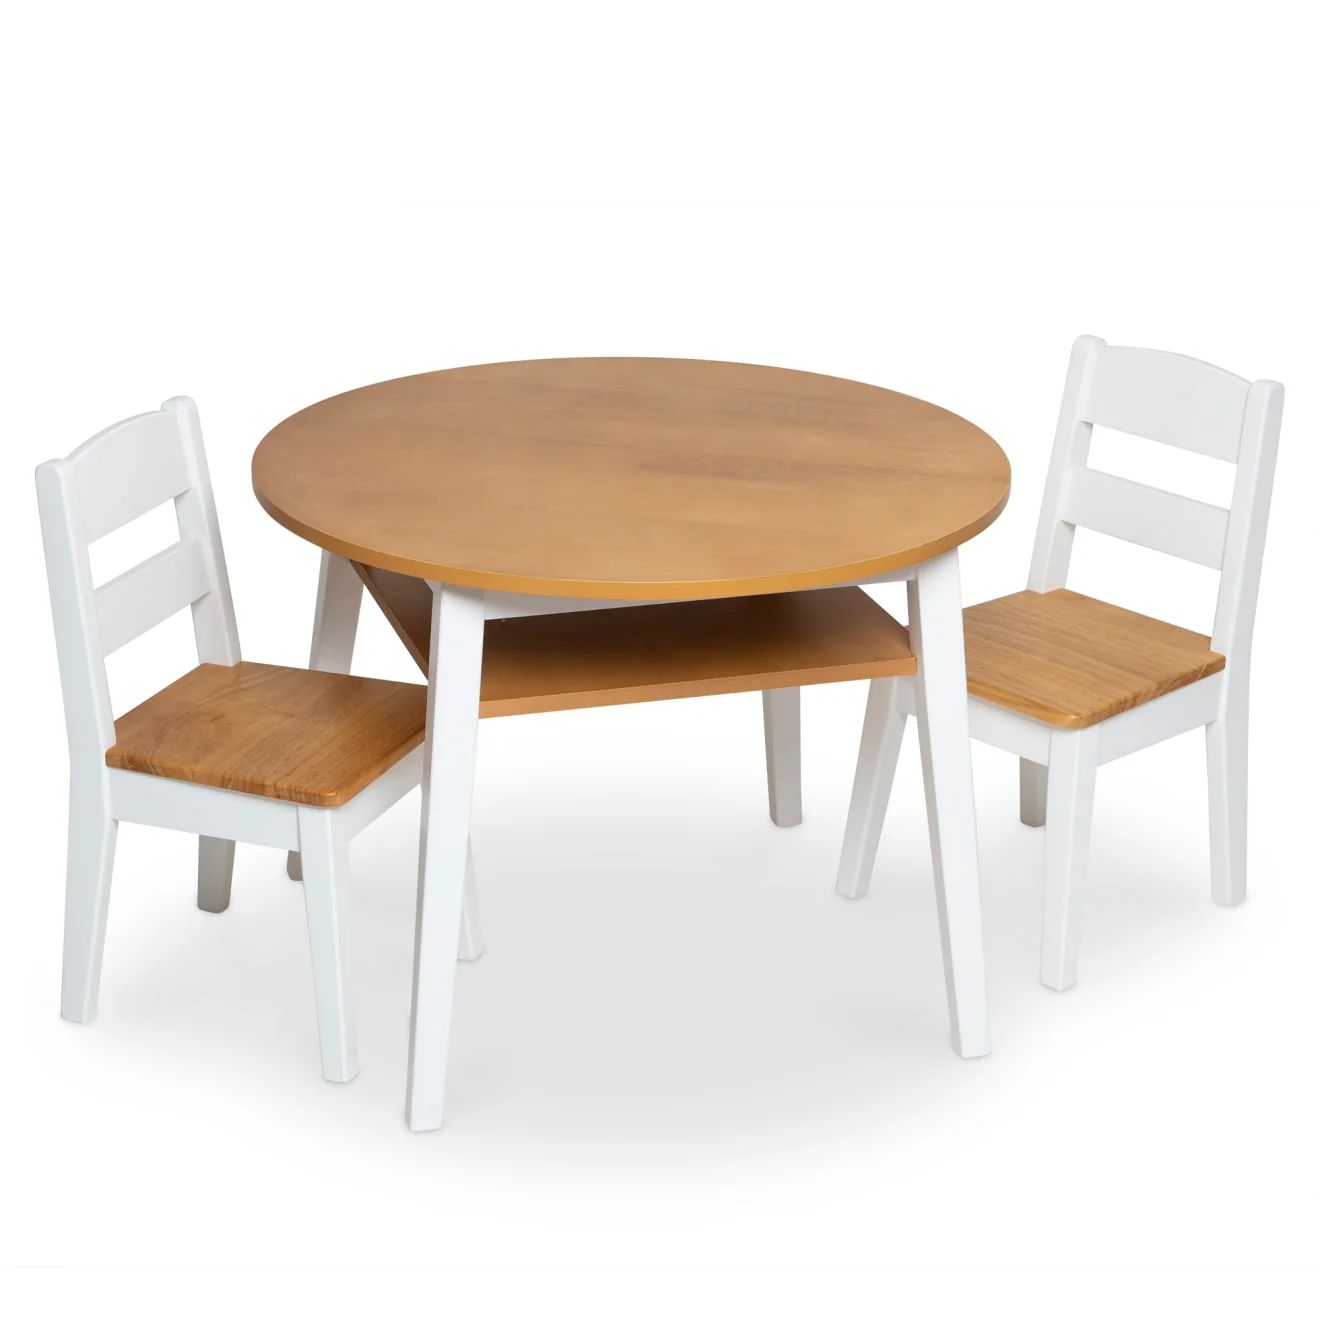 Wooden Round Table & Chairs Set | Melissa and Doug